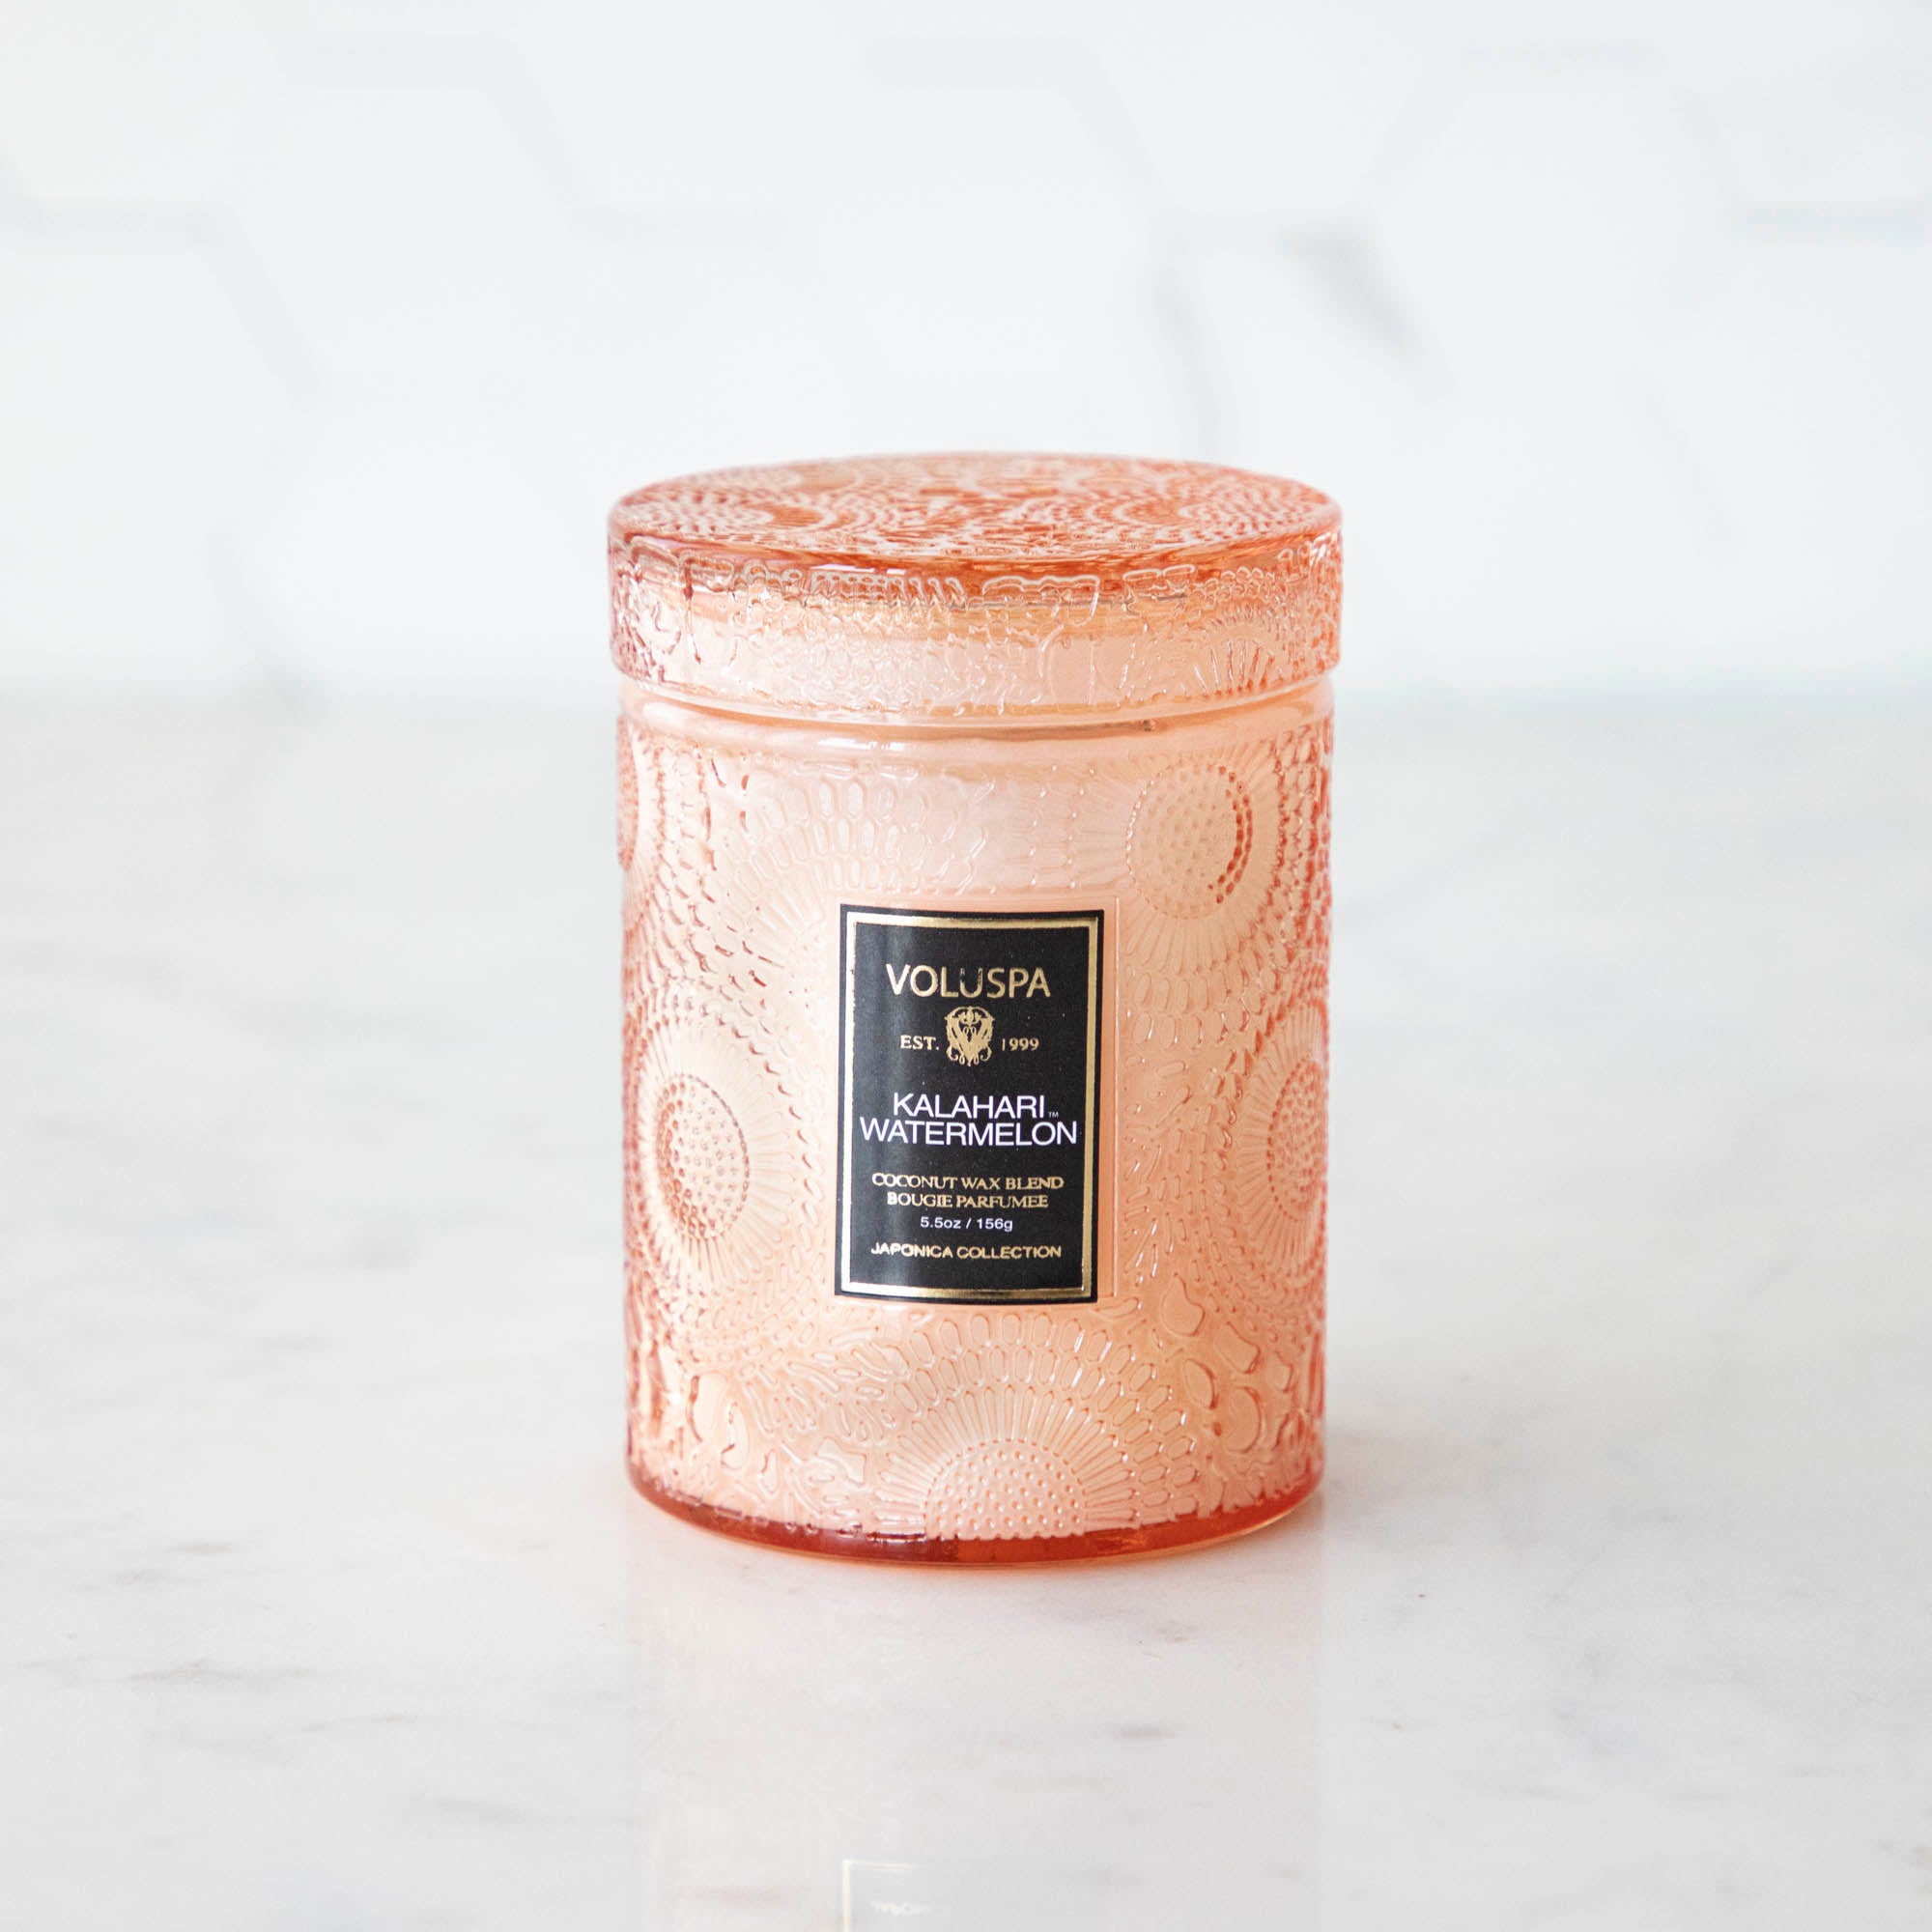 Two Voluspa Kalahari Watermelon candles on a marble surface with matches nearby, featuring a crisp cucumber aroma.